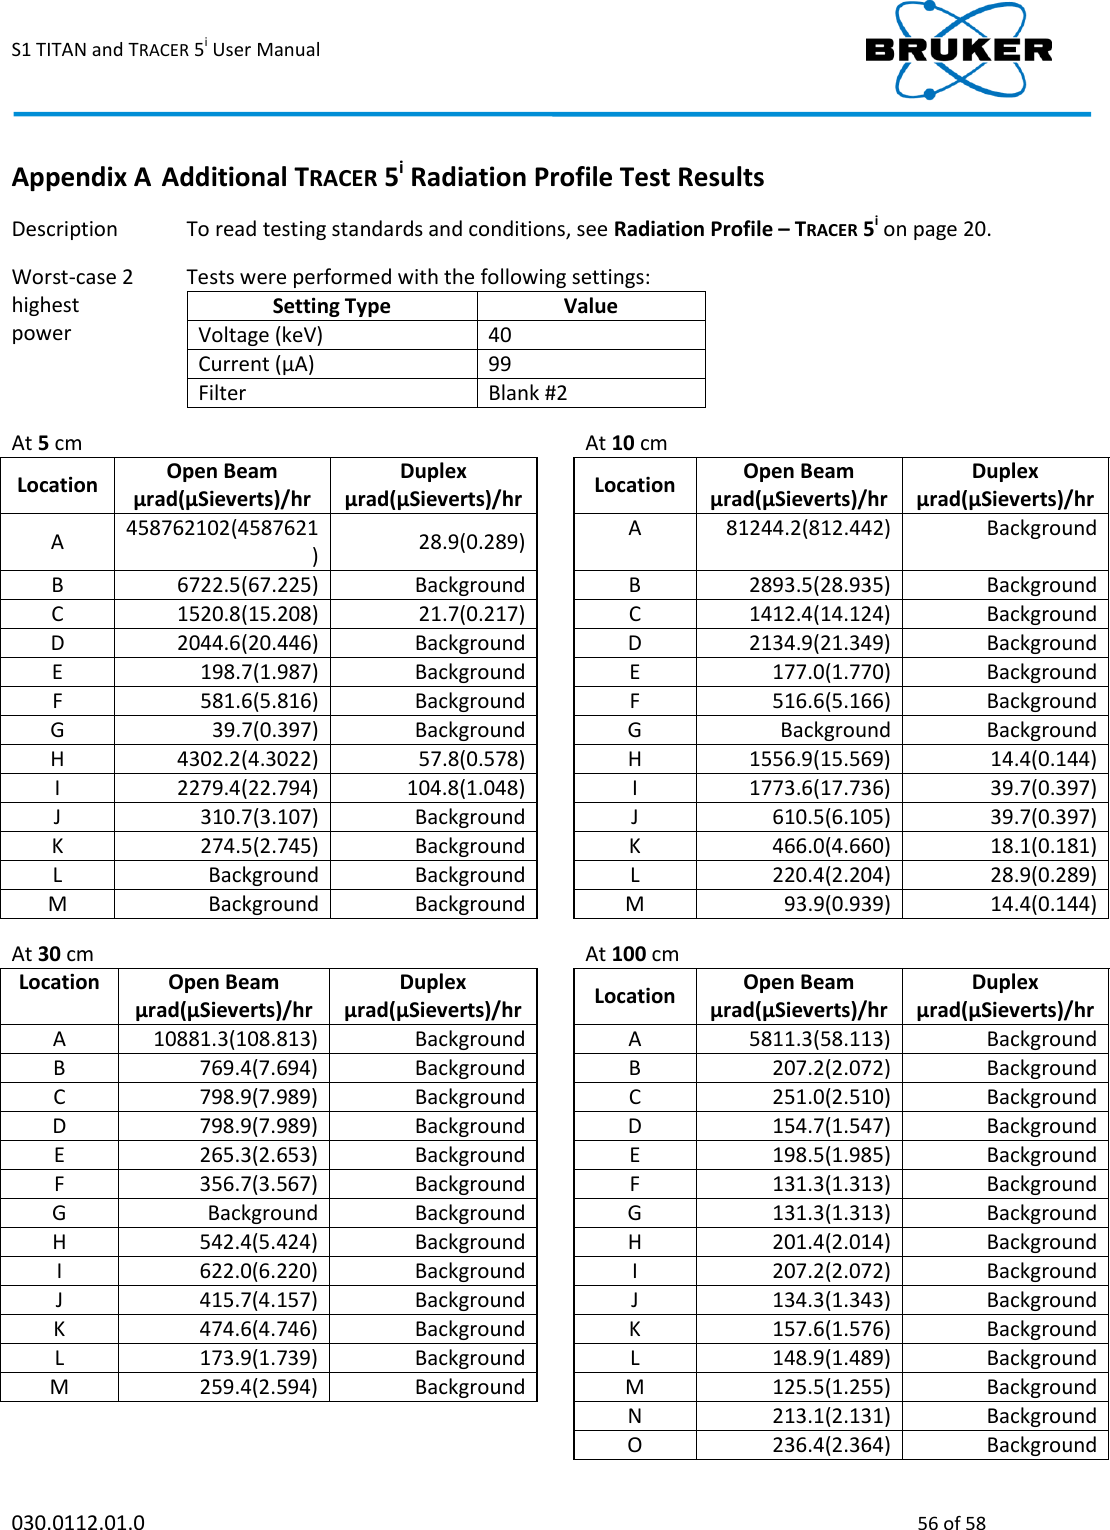 S1 TITAN and TRACER 5i User Manual  030.0112.01.0  56 of 58  Additional TRACER 5i Radiation Profile Test Results Appendix A Description  To read testing standards and conditions, see Radiation Profile – TRACER 5i on page 20.  Worst-case 2 highest power  Tests were performed with the following settings: Setting Type Value Voltage (keV) 40 Current (μA) 99 Filter Blank #2   At 5 cm    At 10 cm   Location Open Beam μrad(μSieverts)/hr Duplex μrad(μSieverts)/hr  Location Open Beam μrad(μSieverts)/hr Duplex μrad(μSieverts)/hr A 458762102(4587621) 28.9(0.289)  A 81244.2(812.442) Background B 6722.5(67.225) Background  B 2893.5(28.935) Background C 1520.8(15.208) 21.7(0.217)  C 1412.4(14.124) Background D 2044.6(20.446) Background  D 2134.9(21.349) Background E 198.7(1.987) Background  E 177.0(1.770) Background F 581.6(5.816) Background  F 516.6(5.166) Background G 39.7(0.397) Background  G Background Background H 4302.2(4.3022) 57.8(0.578)  H 1556.9(15.569) 14.4(0.144) I 2279.4(22.794) 104.8(1.048)  I 1773.6(17.736) 39.7(0.397) J 310.7(3.107) Background  J 610.5(6.105) 39.7(0.397) K 274.5(2.745) Background  K 466.0(4.660) 18.1(0.181) L Background Background  L 220.4(2.204) 28.9(0.289) M Background Background  M 93.9(0.939) 14.4(0.144)  At 30 cm    At 100 cm   Location Open Beam μrad(μSieverts)/hr Duplex μrad(μSieverts)/hr  Location Open Beam μrad(μSieverts)/hr Duplex μrad(μSieverts)/hr A 10881.3(108.813) Background  A 5811.3(58.113) Background B 769.4(7.694) Background  B 207.2(2.072) Background C 798.9(7.989) Background  C 251.0(2.510) Background D 798.9(7.989) Background  D 154.7(1.547) Background E 265.3(2.653) Background  E 198.5(1.985) Background F 356.7(3.567) Background  F 131.3(1.313) Background G Background Background  G 131.3(1.313) Background H 542.4(5.424) Background  H 201.4(2.014) Background I 622.0(6.220) Background  I 207.2(2.072) Background J 415.7(4.157) Background  J 134.3(1.343) Background K 474.6(4.746) Background  K 157.6(1.576) Background L 173.9(1.739) Background  L 148.9(1.489) Background M 259.4(2.594) Background  M 125.5(1.255) Background     N 213.1(2.131) Background     O 236.4(2.364) Background 